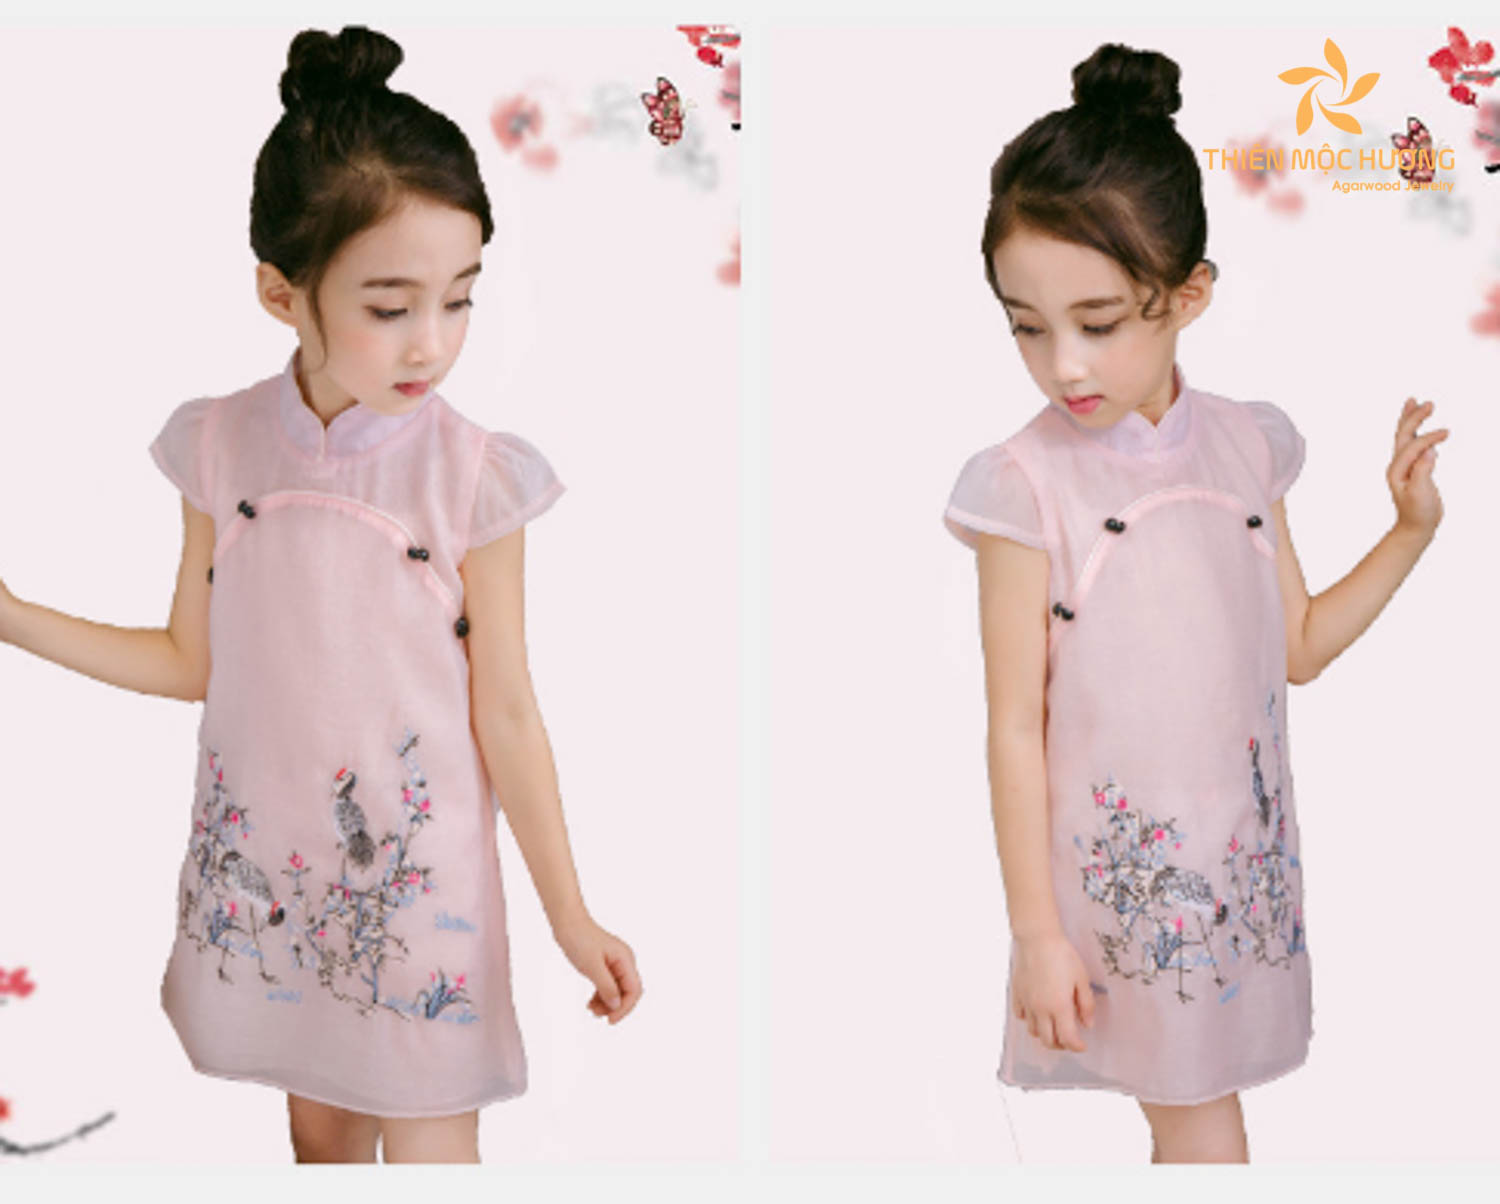 The cheongsam, also known as the qipao, is a popular choice for little girls